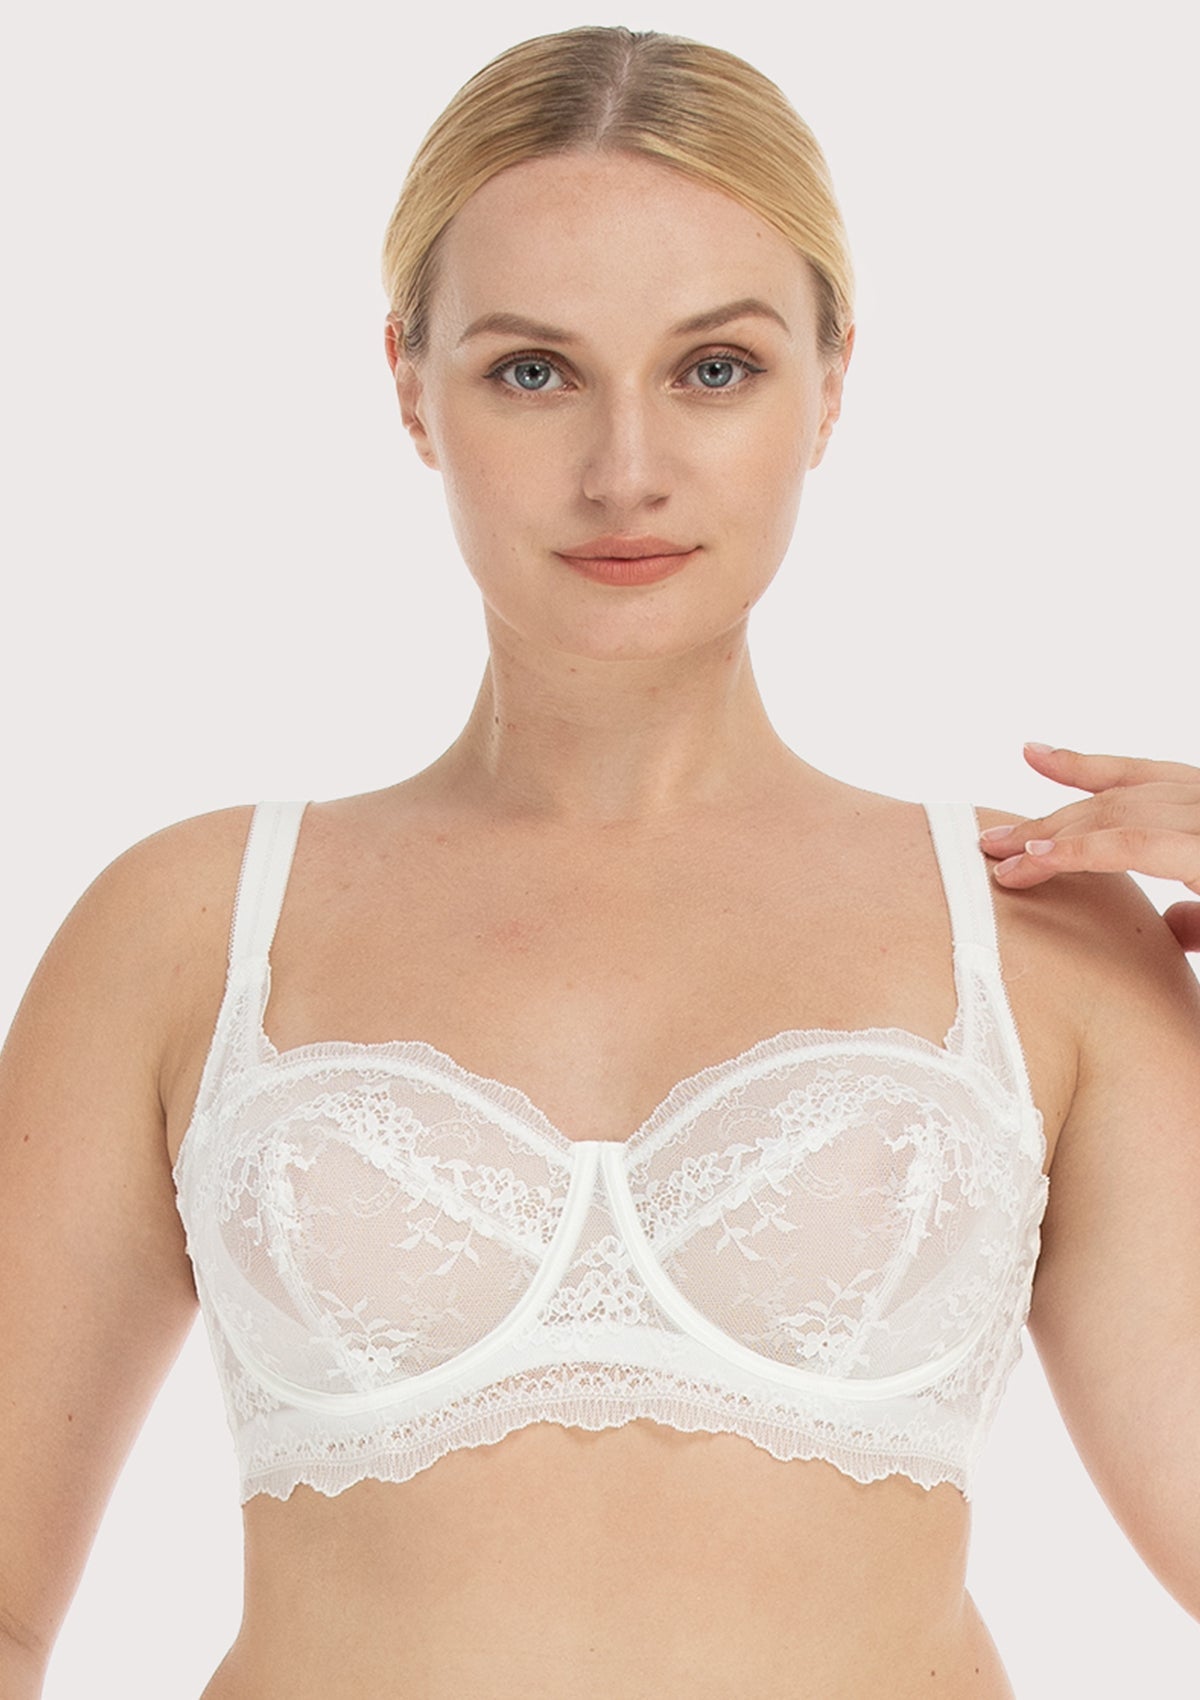 HSIA I Do Floral Lace Bridal Balconette Beautiful Bra For Special Day - Pink / 36 / C